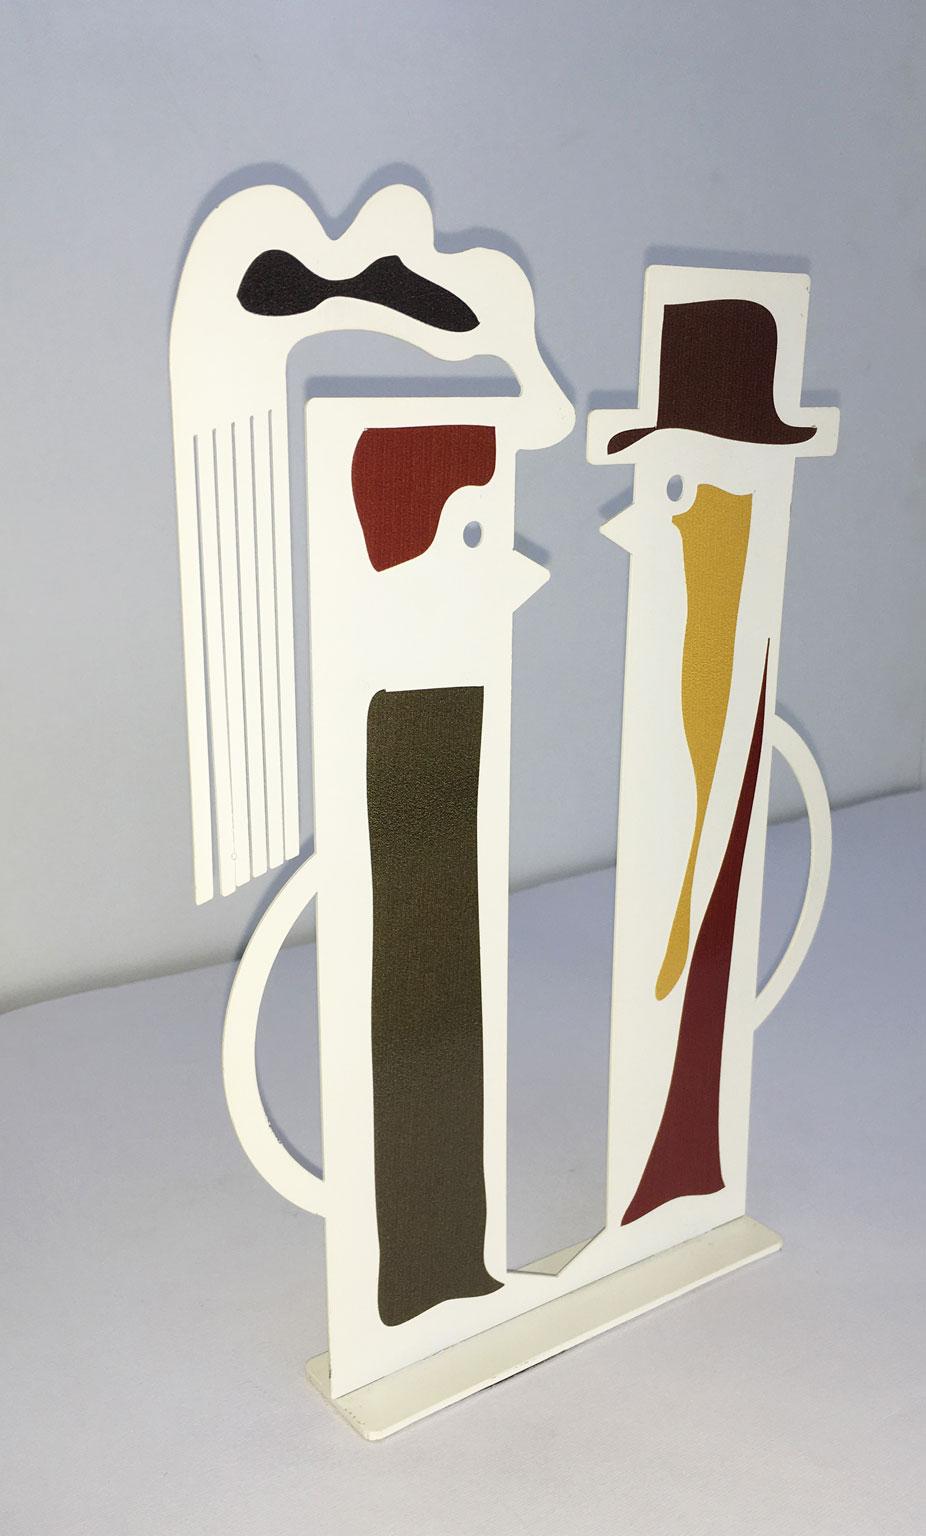 Italy 1980 Riccardo Dalisi  White Painted Metal Amanti In Good Condition For Sale In Brescia, IT